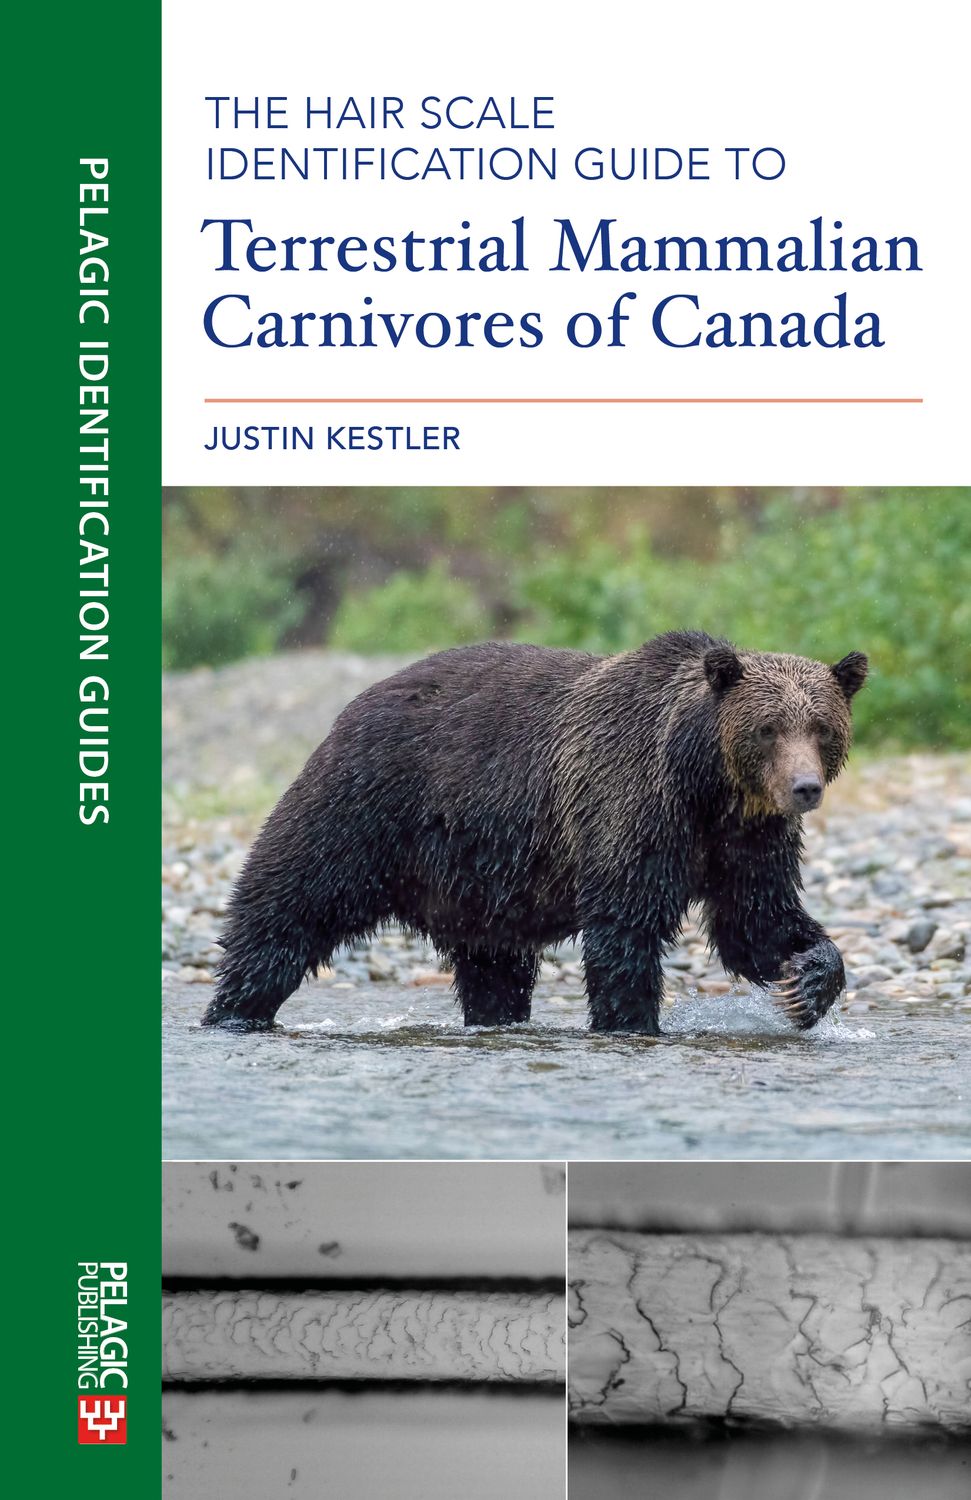 The Hair Scale Identification Guide to Terrestrial Carnivores of Canada - Pelagic Publishing